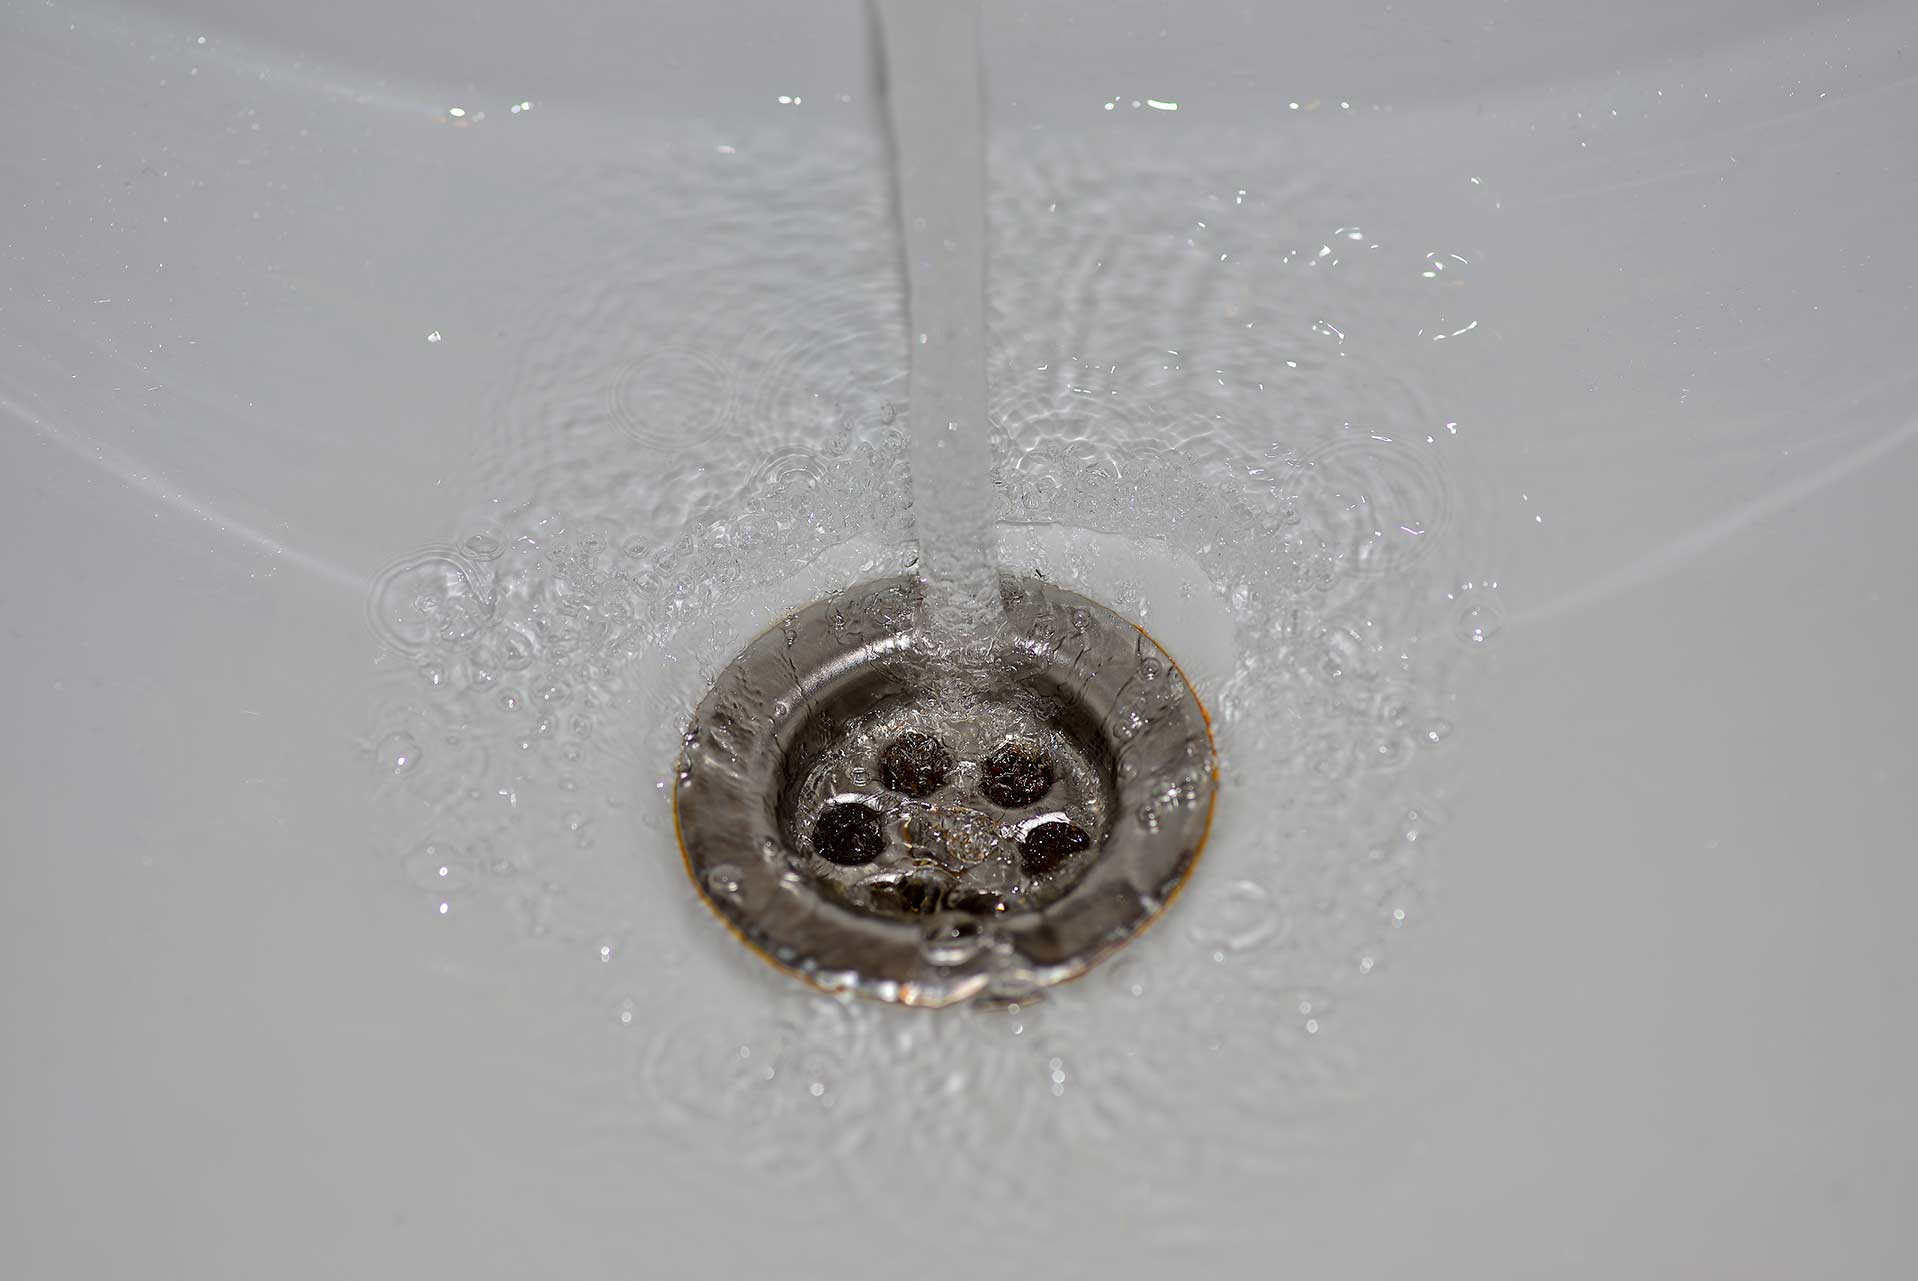 A2B Drains provides services to unblock blocked sinks and drains for properties in Great Harwood.